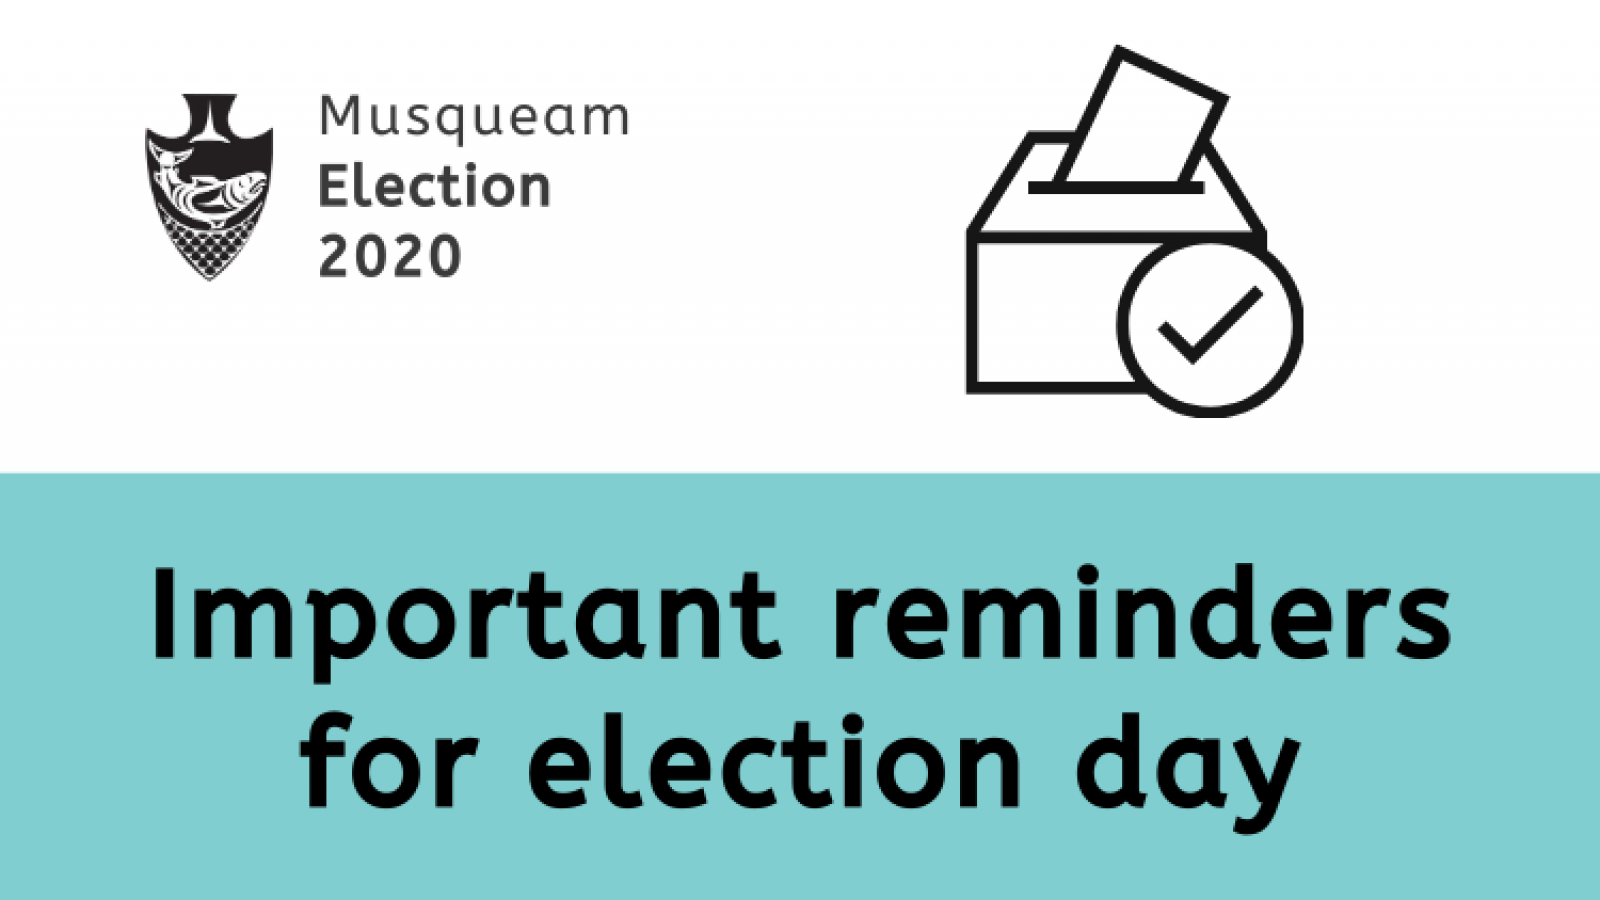 important reminders for musqueam election day